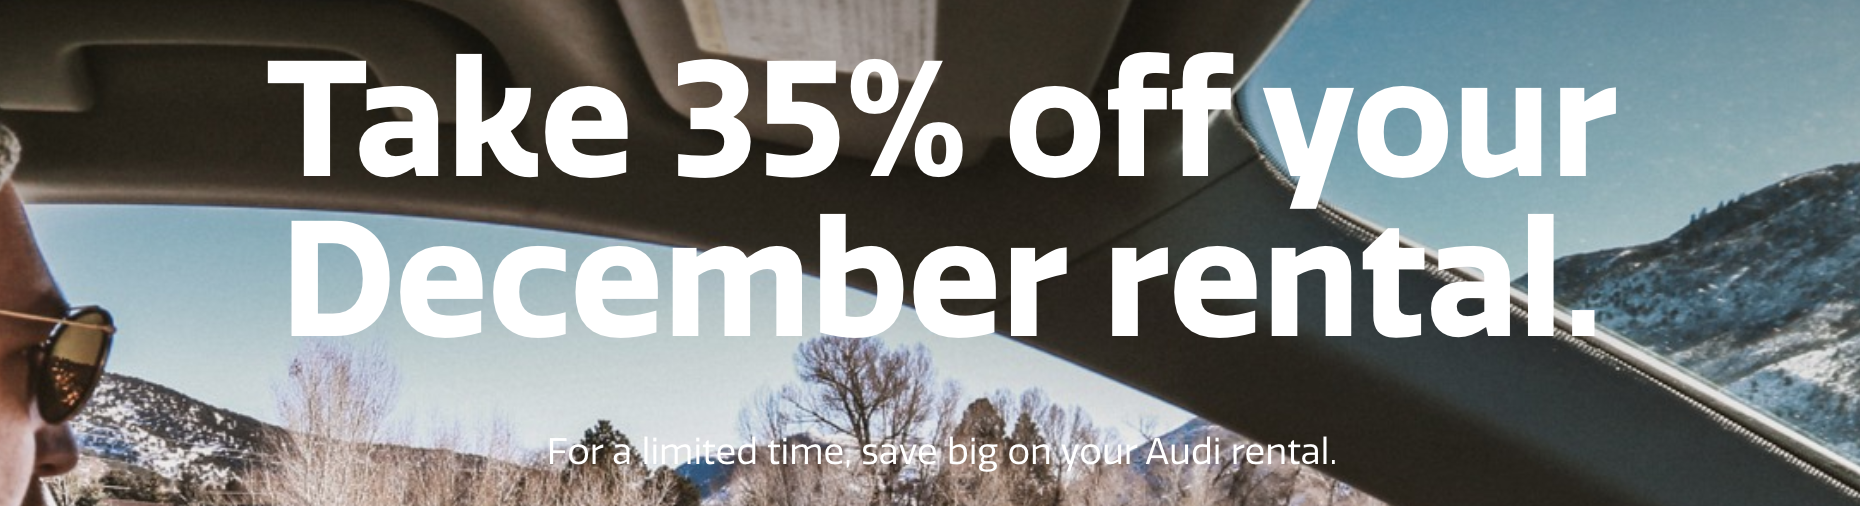 Silvercar black friday promotion will give you 35% off your rental for the month of December.